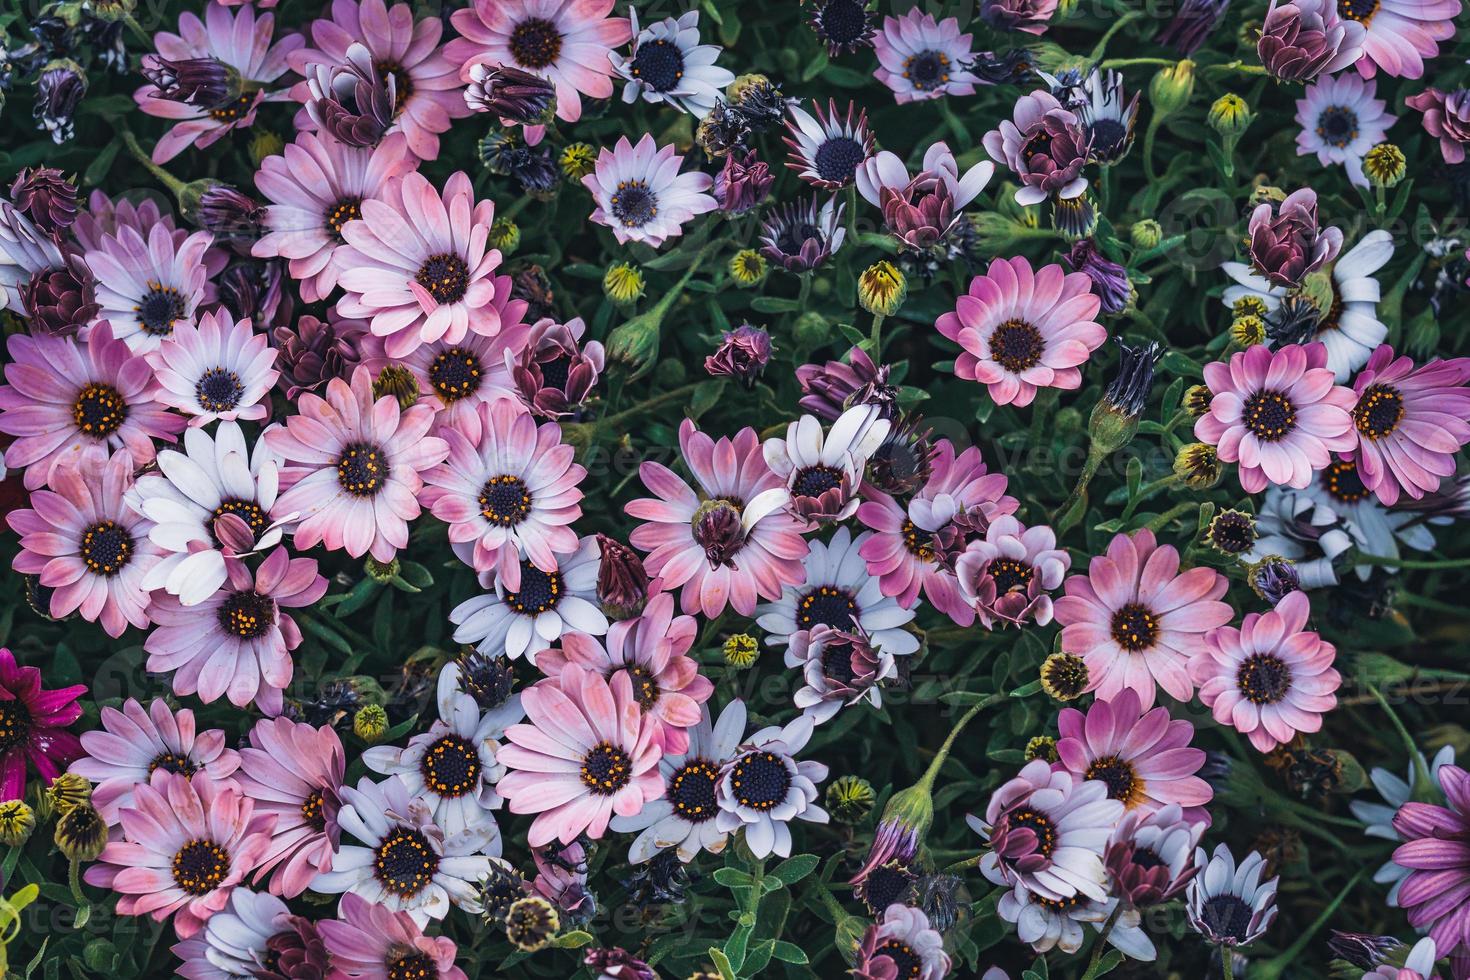 Flowers of African daisy photo